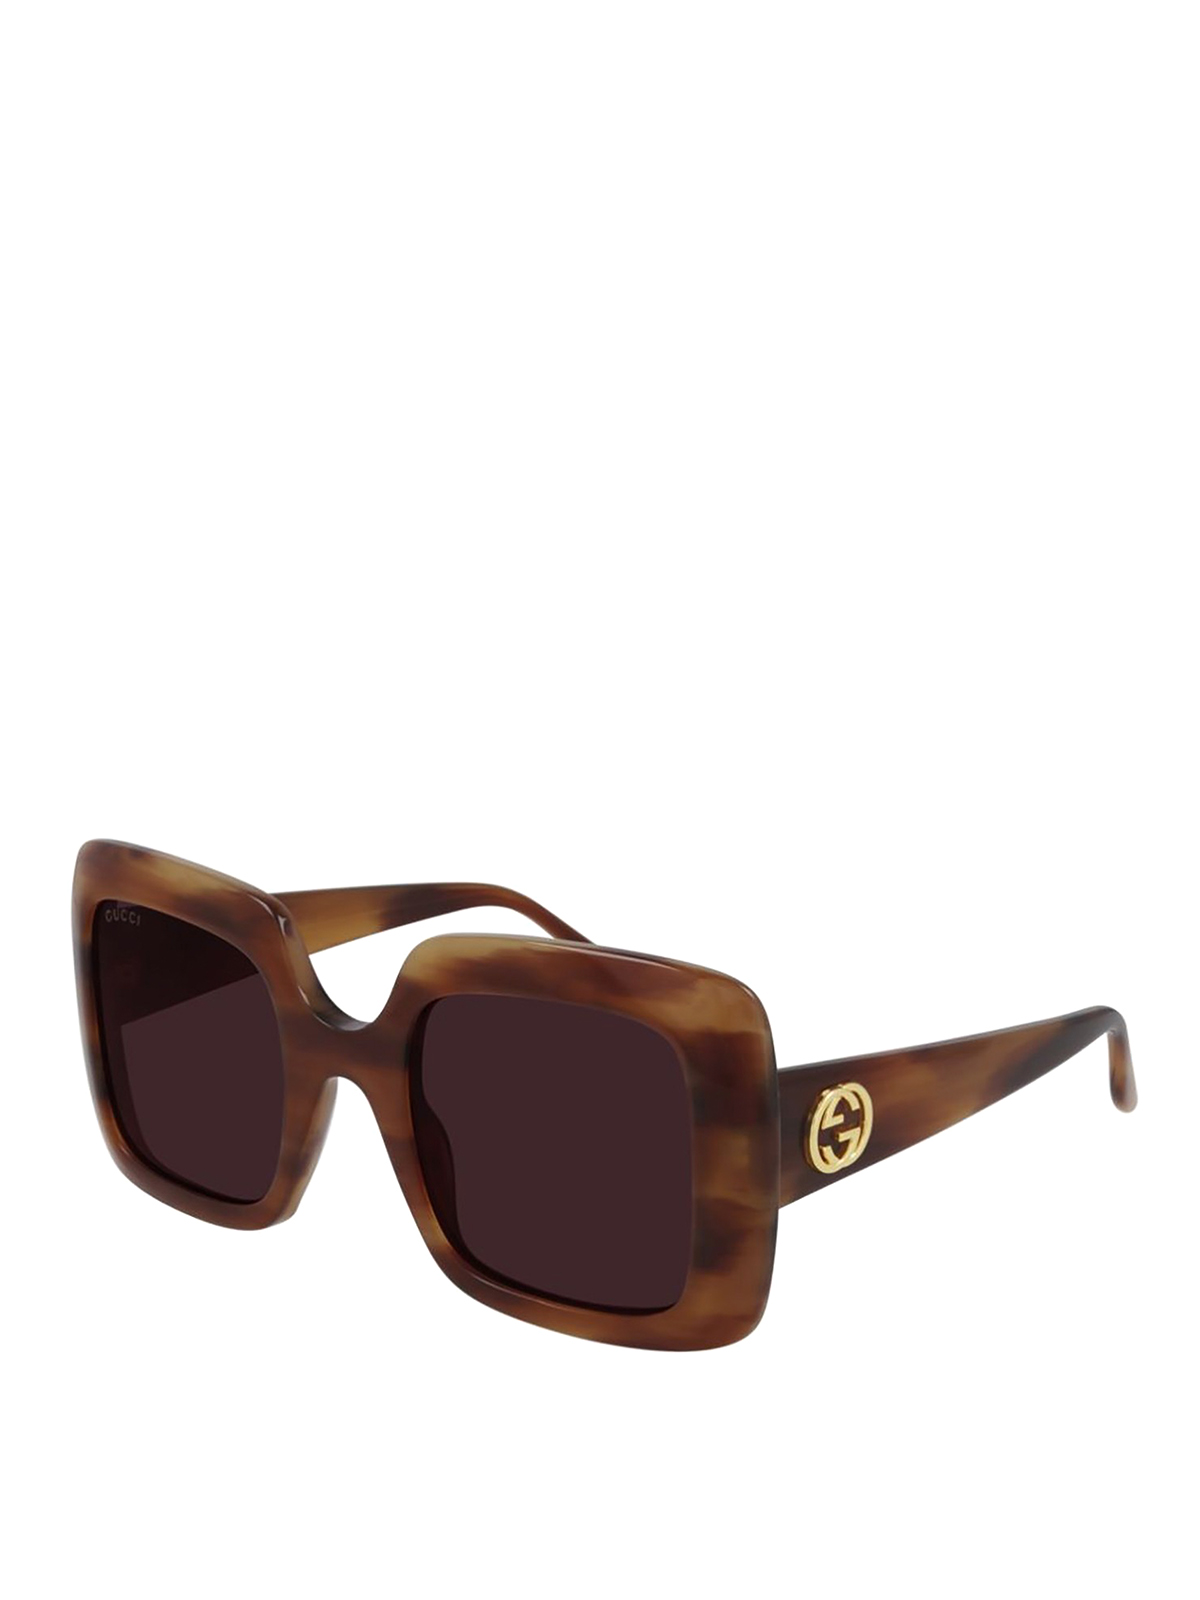 Gucci Vintage Styled Sunglasses In Brown